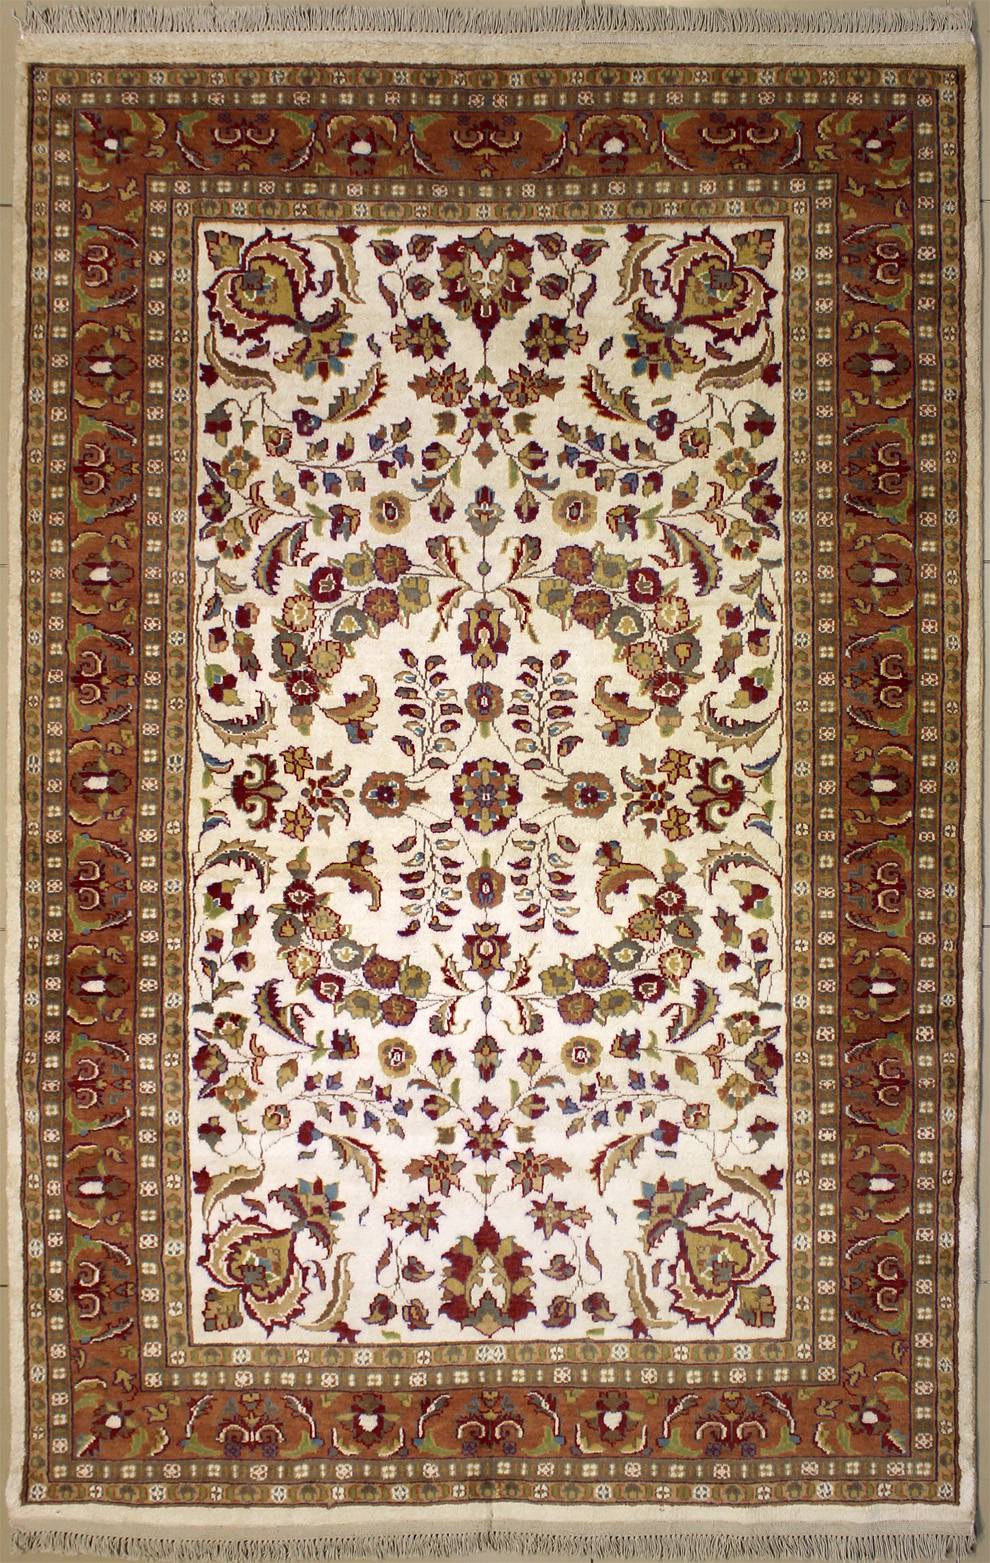 100% Original Hand-Knotted in Red,Beige,Grey Colors Floral Design a 4x6 Rectangular Rug RugsTC 3'11 x 5'8 Pak Persian Area Rug with Wool Pile 